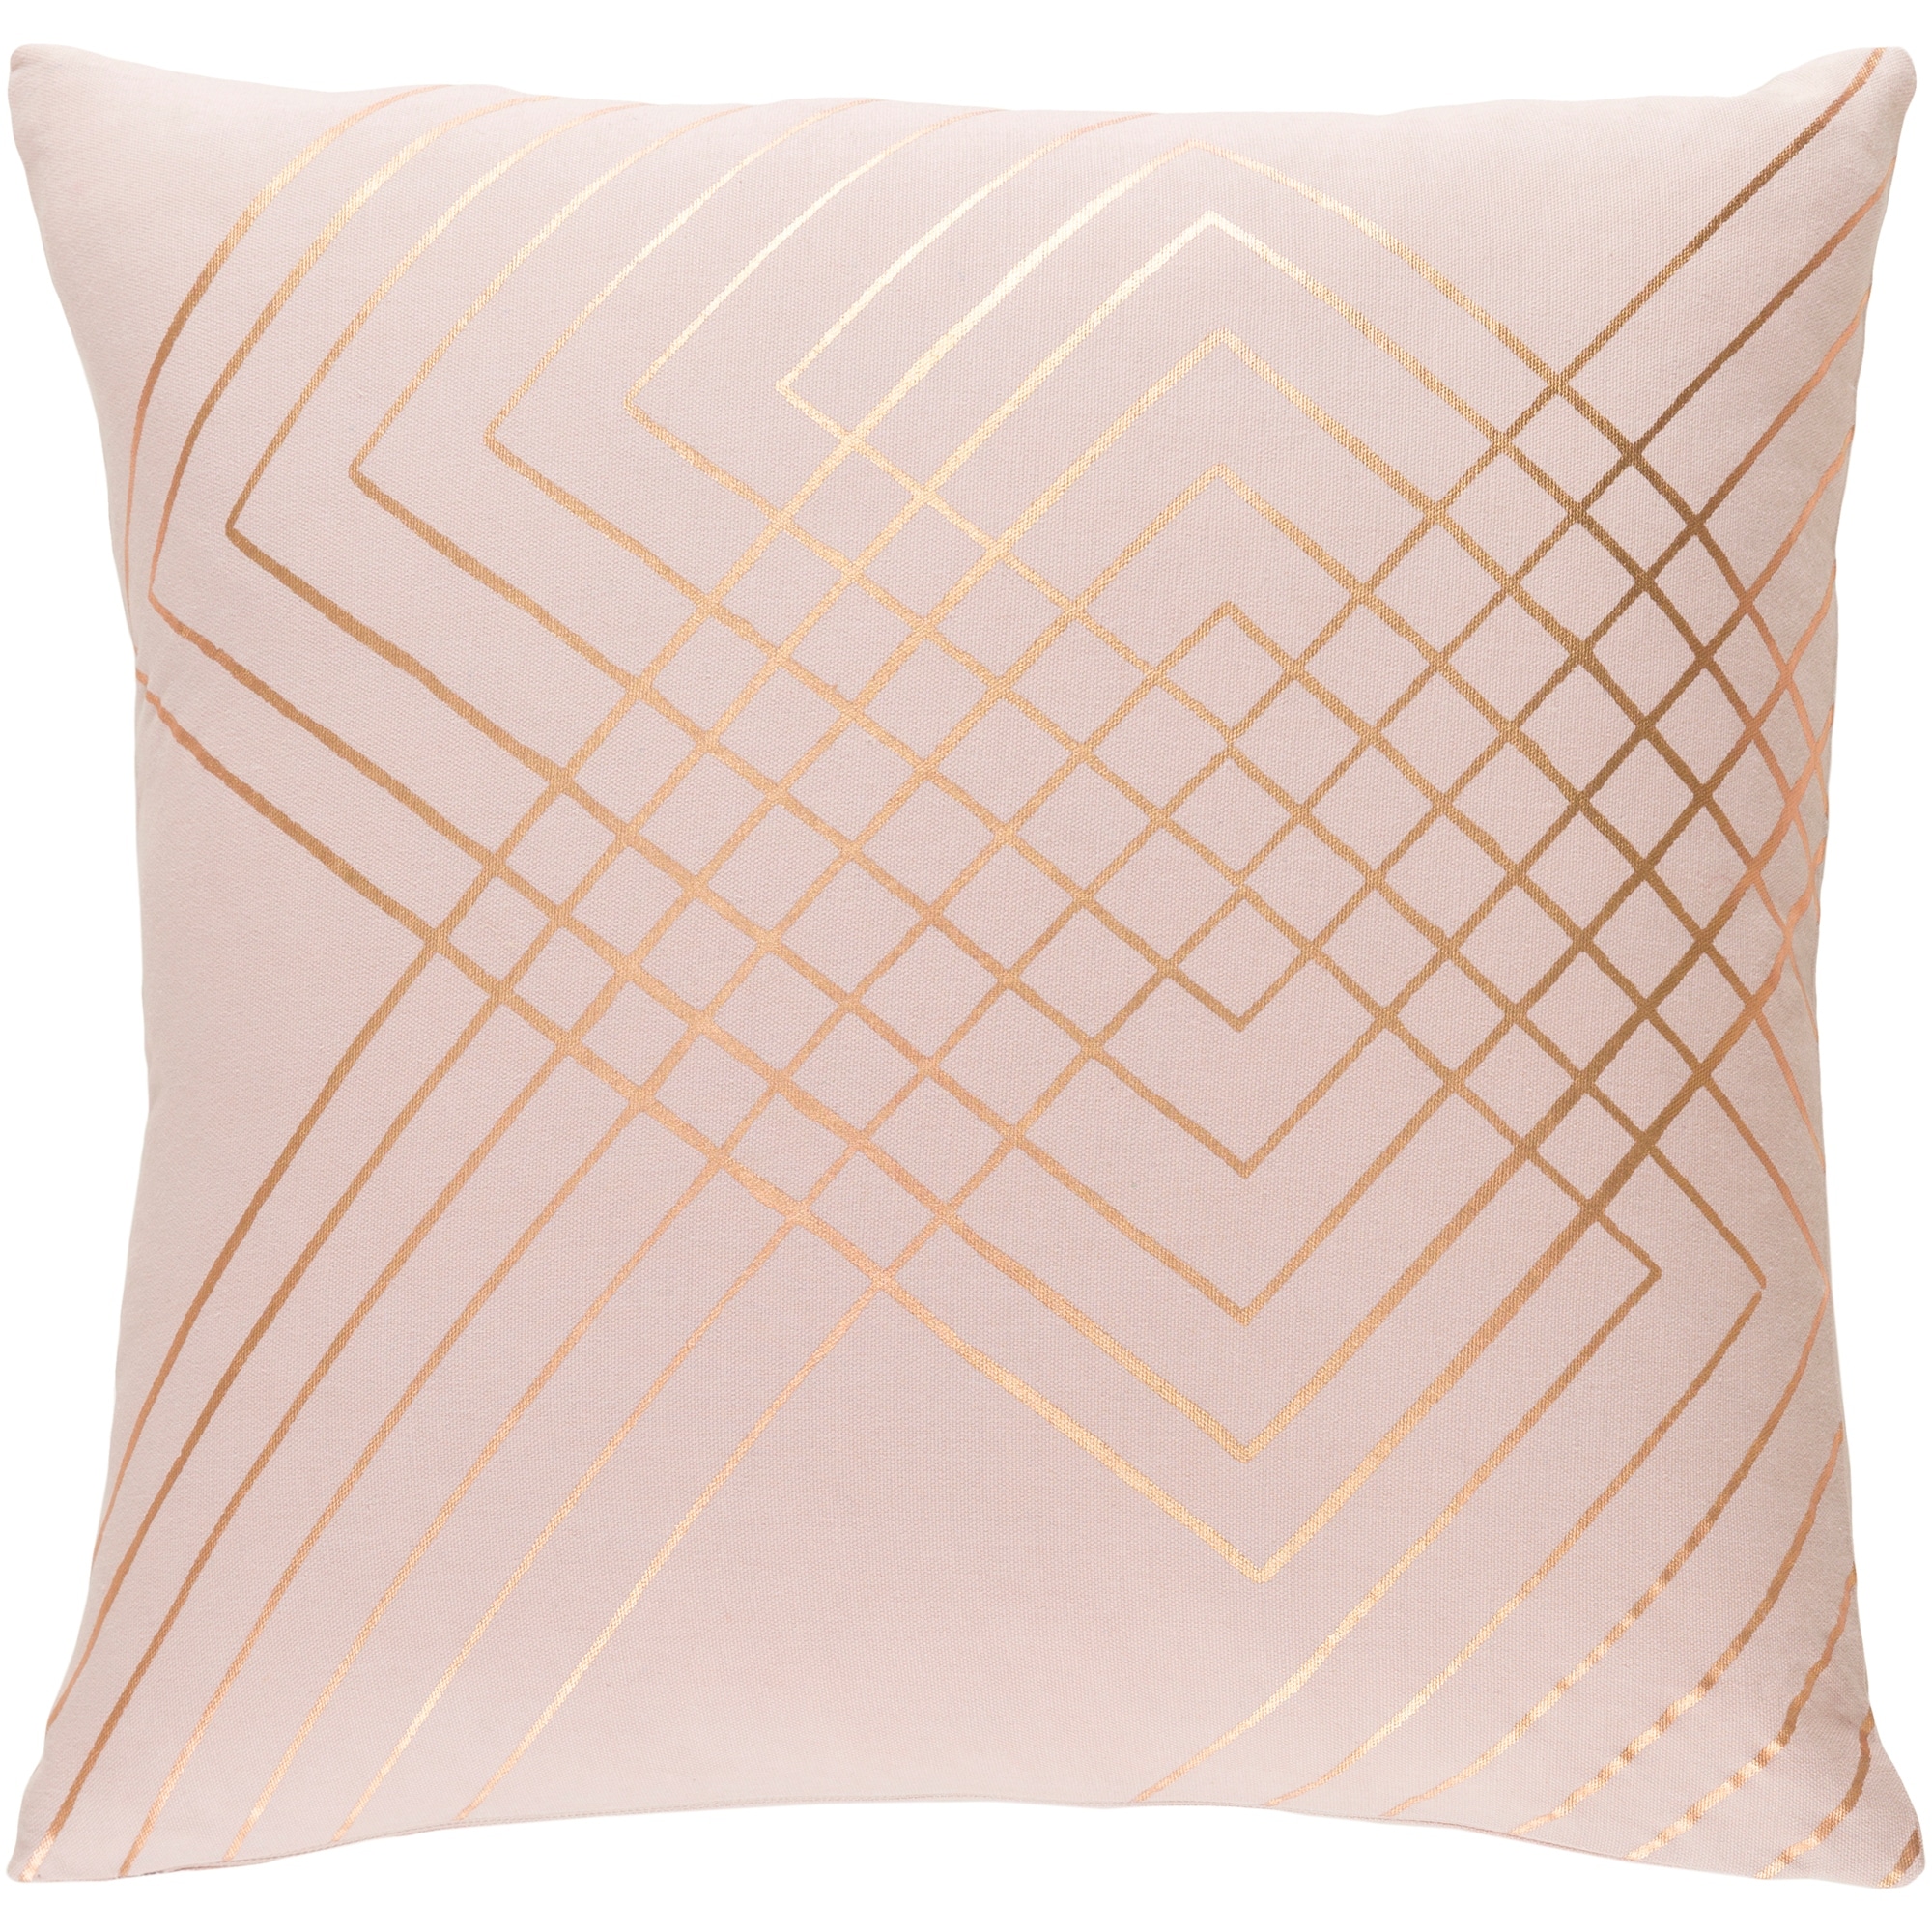 https://ak1.ostkcdn.com/images/products/is/images/direct/6a7d4cd29f2f9359de45fc96a9f433dc979211bc/Decorative-Rosa-Blush-18-inch-Throw-Pillow-Cover.jpg